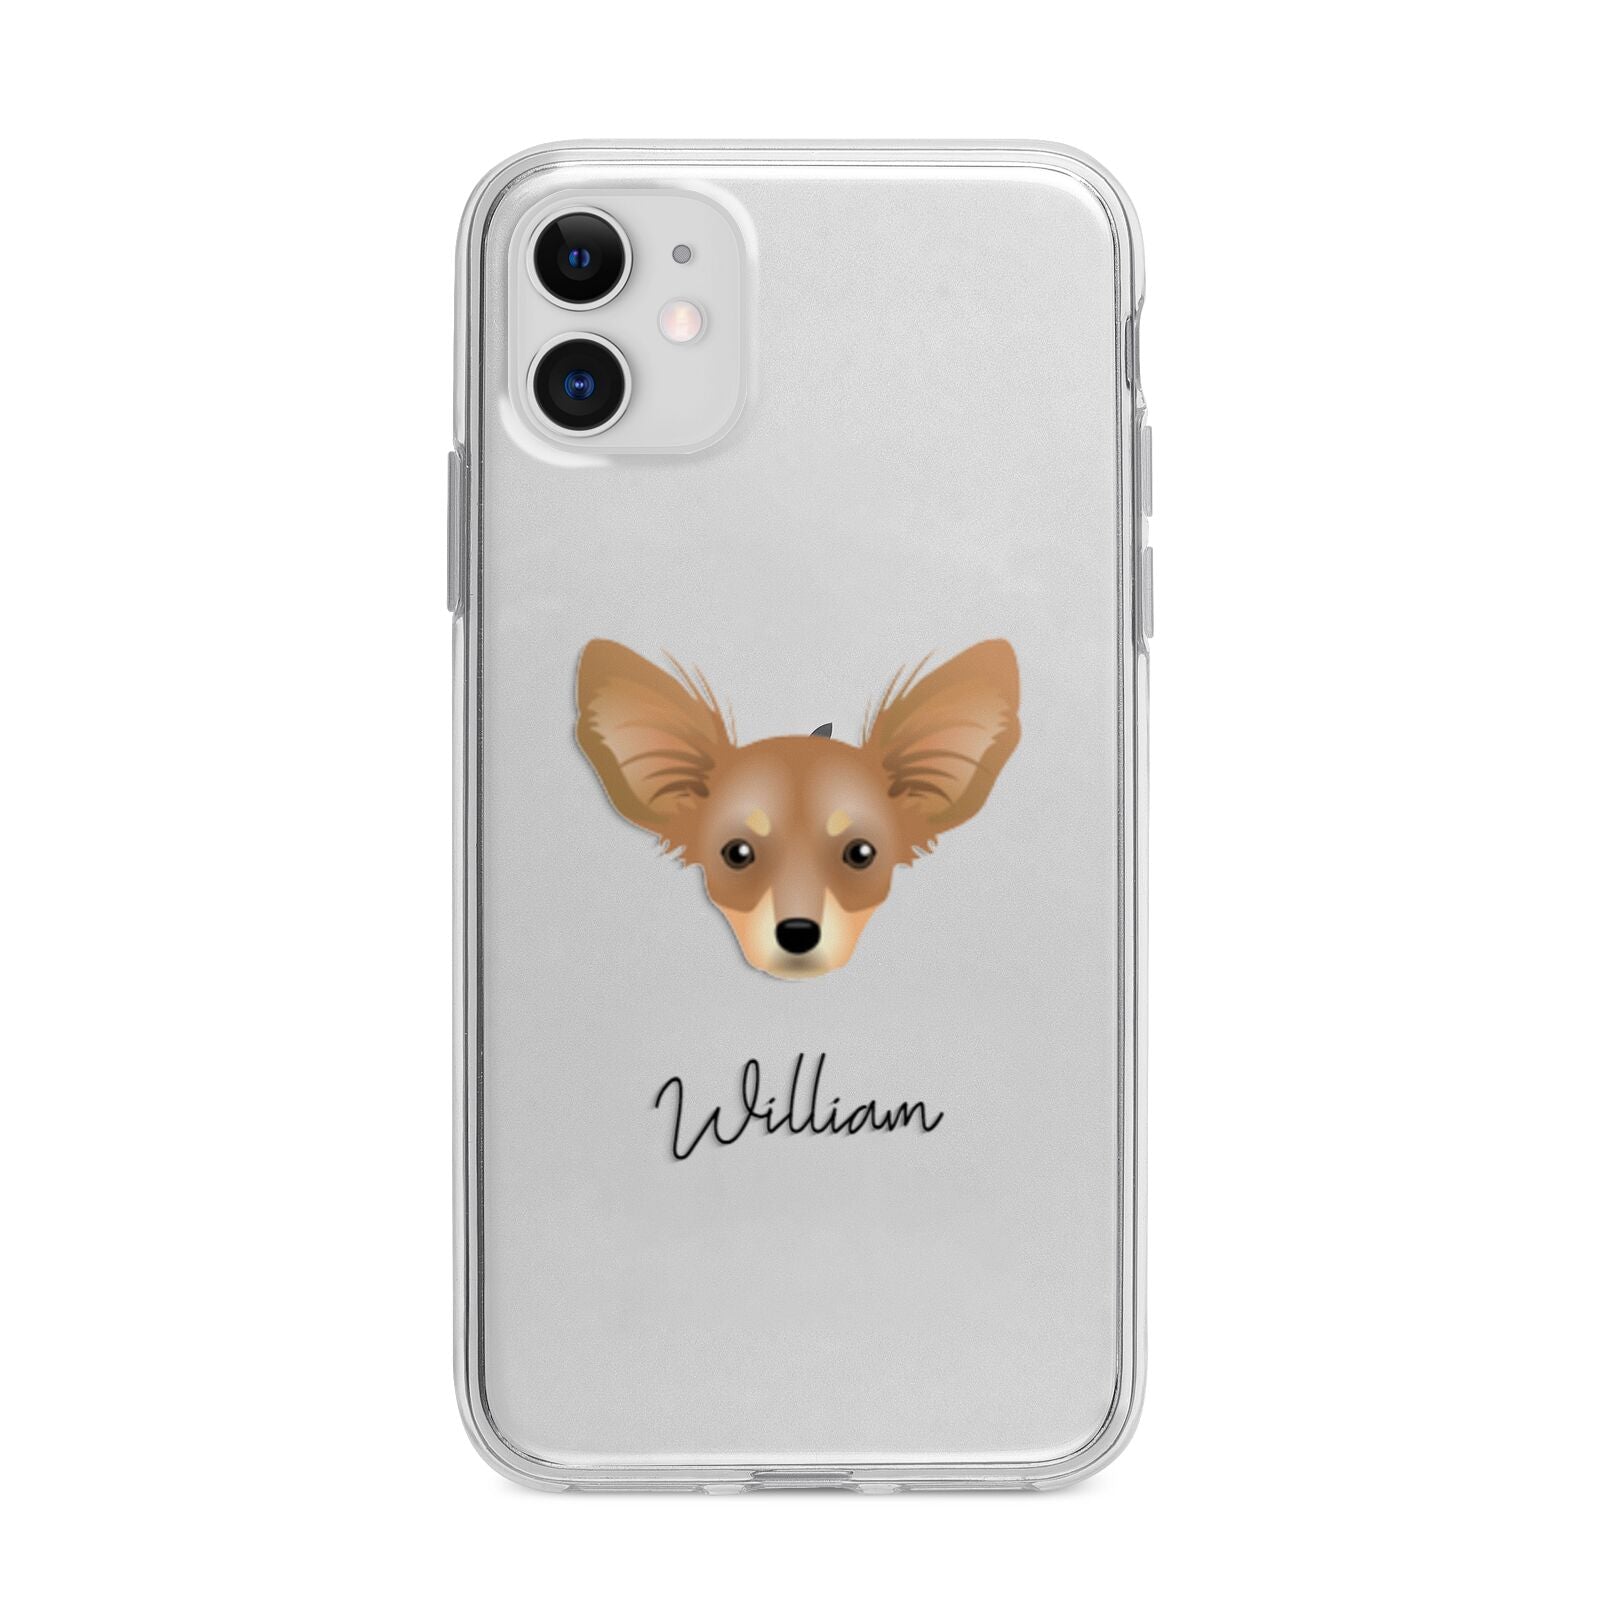 Russian Toy Personalised Apple iPhone 11 in White with Bumper Case